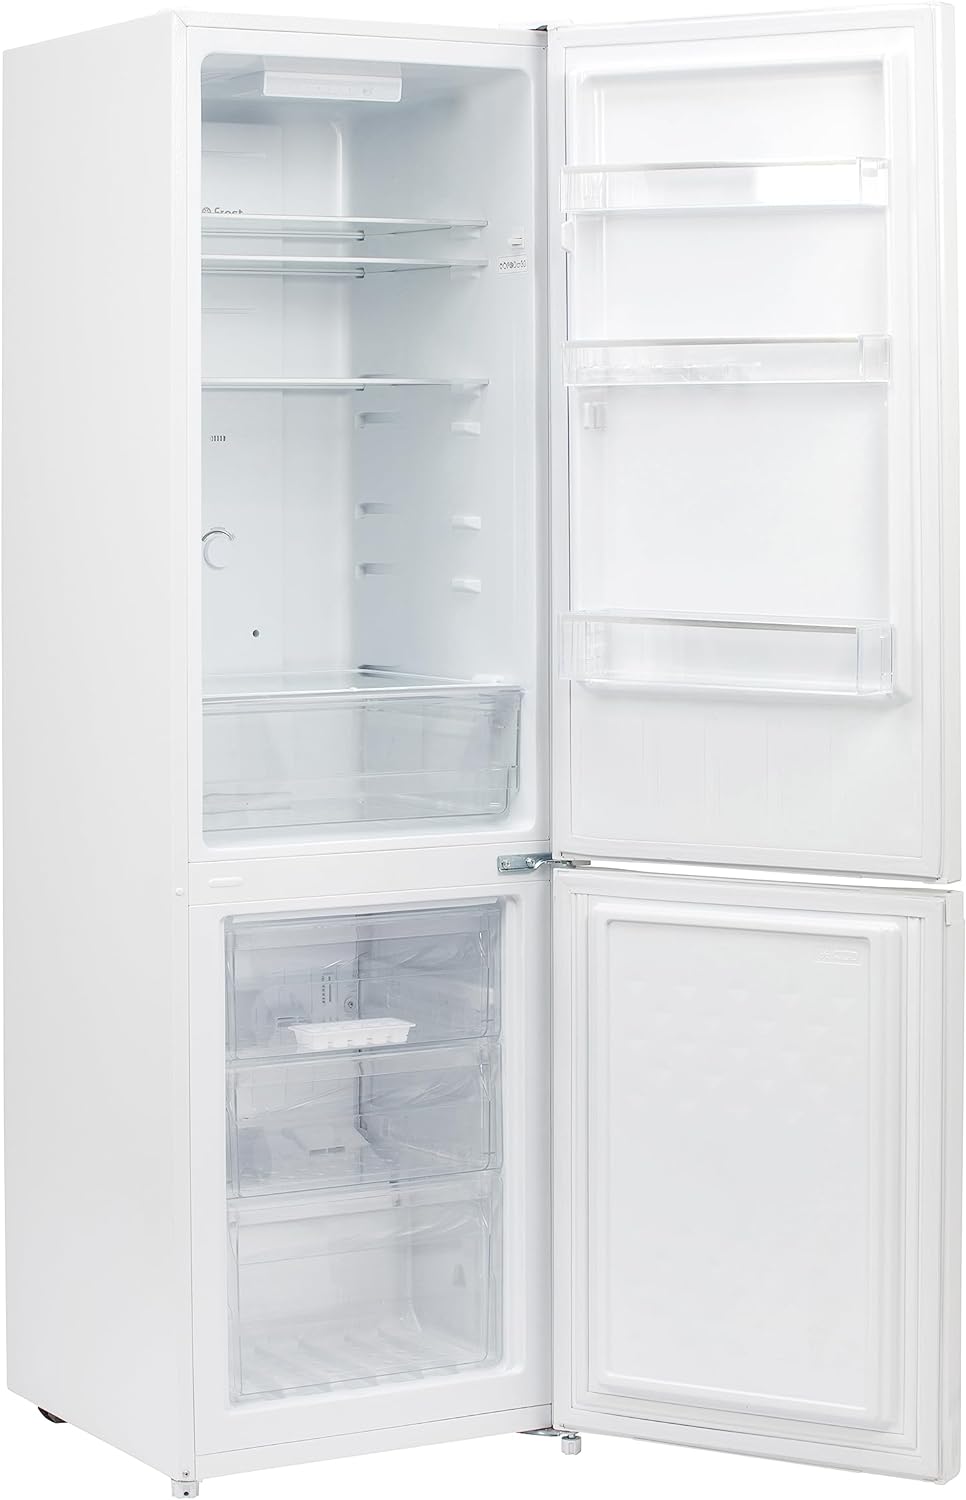 Willow WFF250CW 250L Freestanding 70/30 Fridge Freezer with Adjustable Thermostat, 4* Freezer Rating, Frost Free, Mark - Proof Finish, Automatic Defrost, 2 Year Warranty – White - Amazing Gadgets Outlet